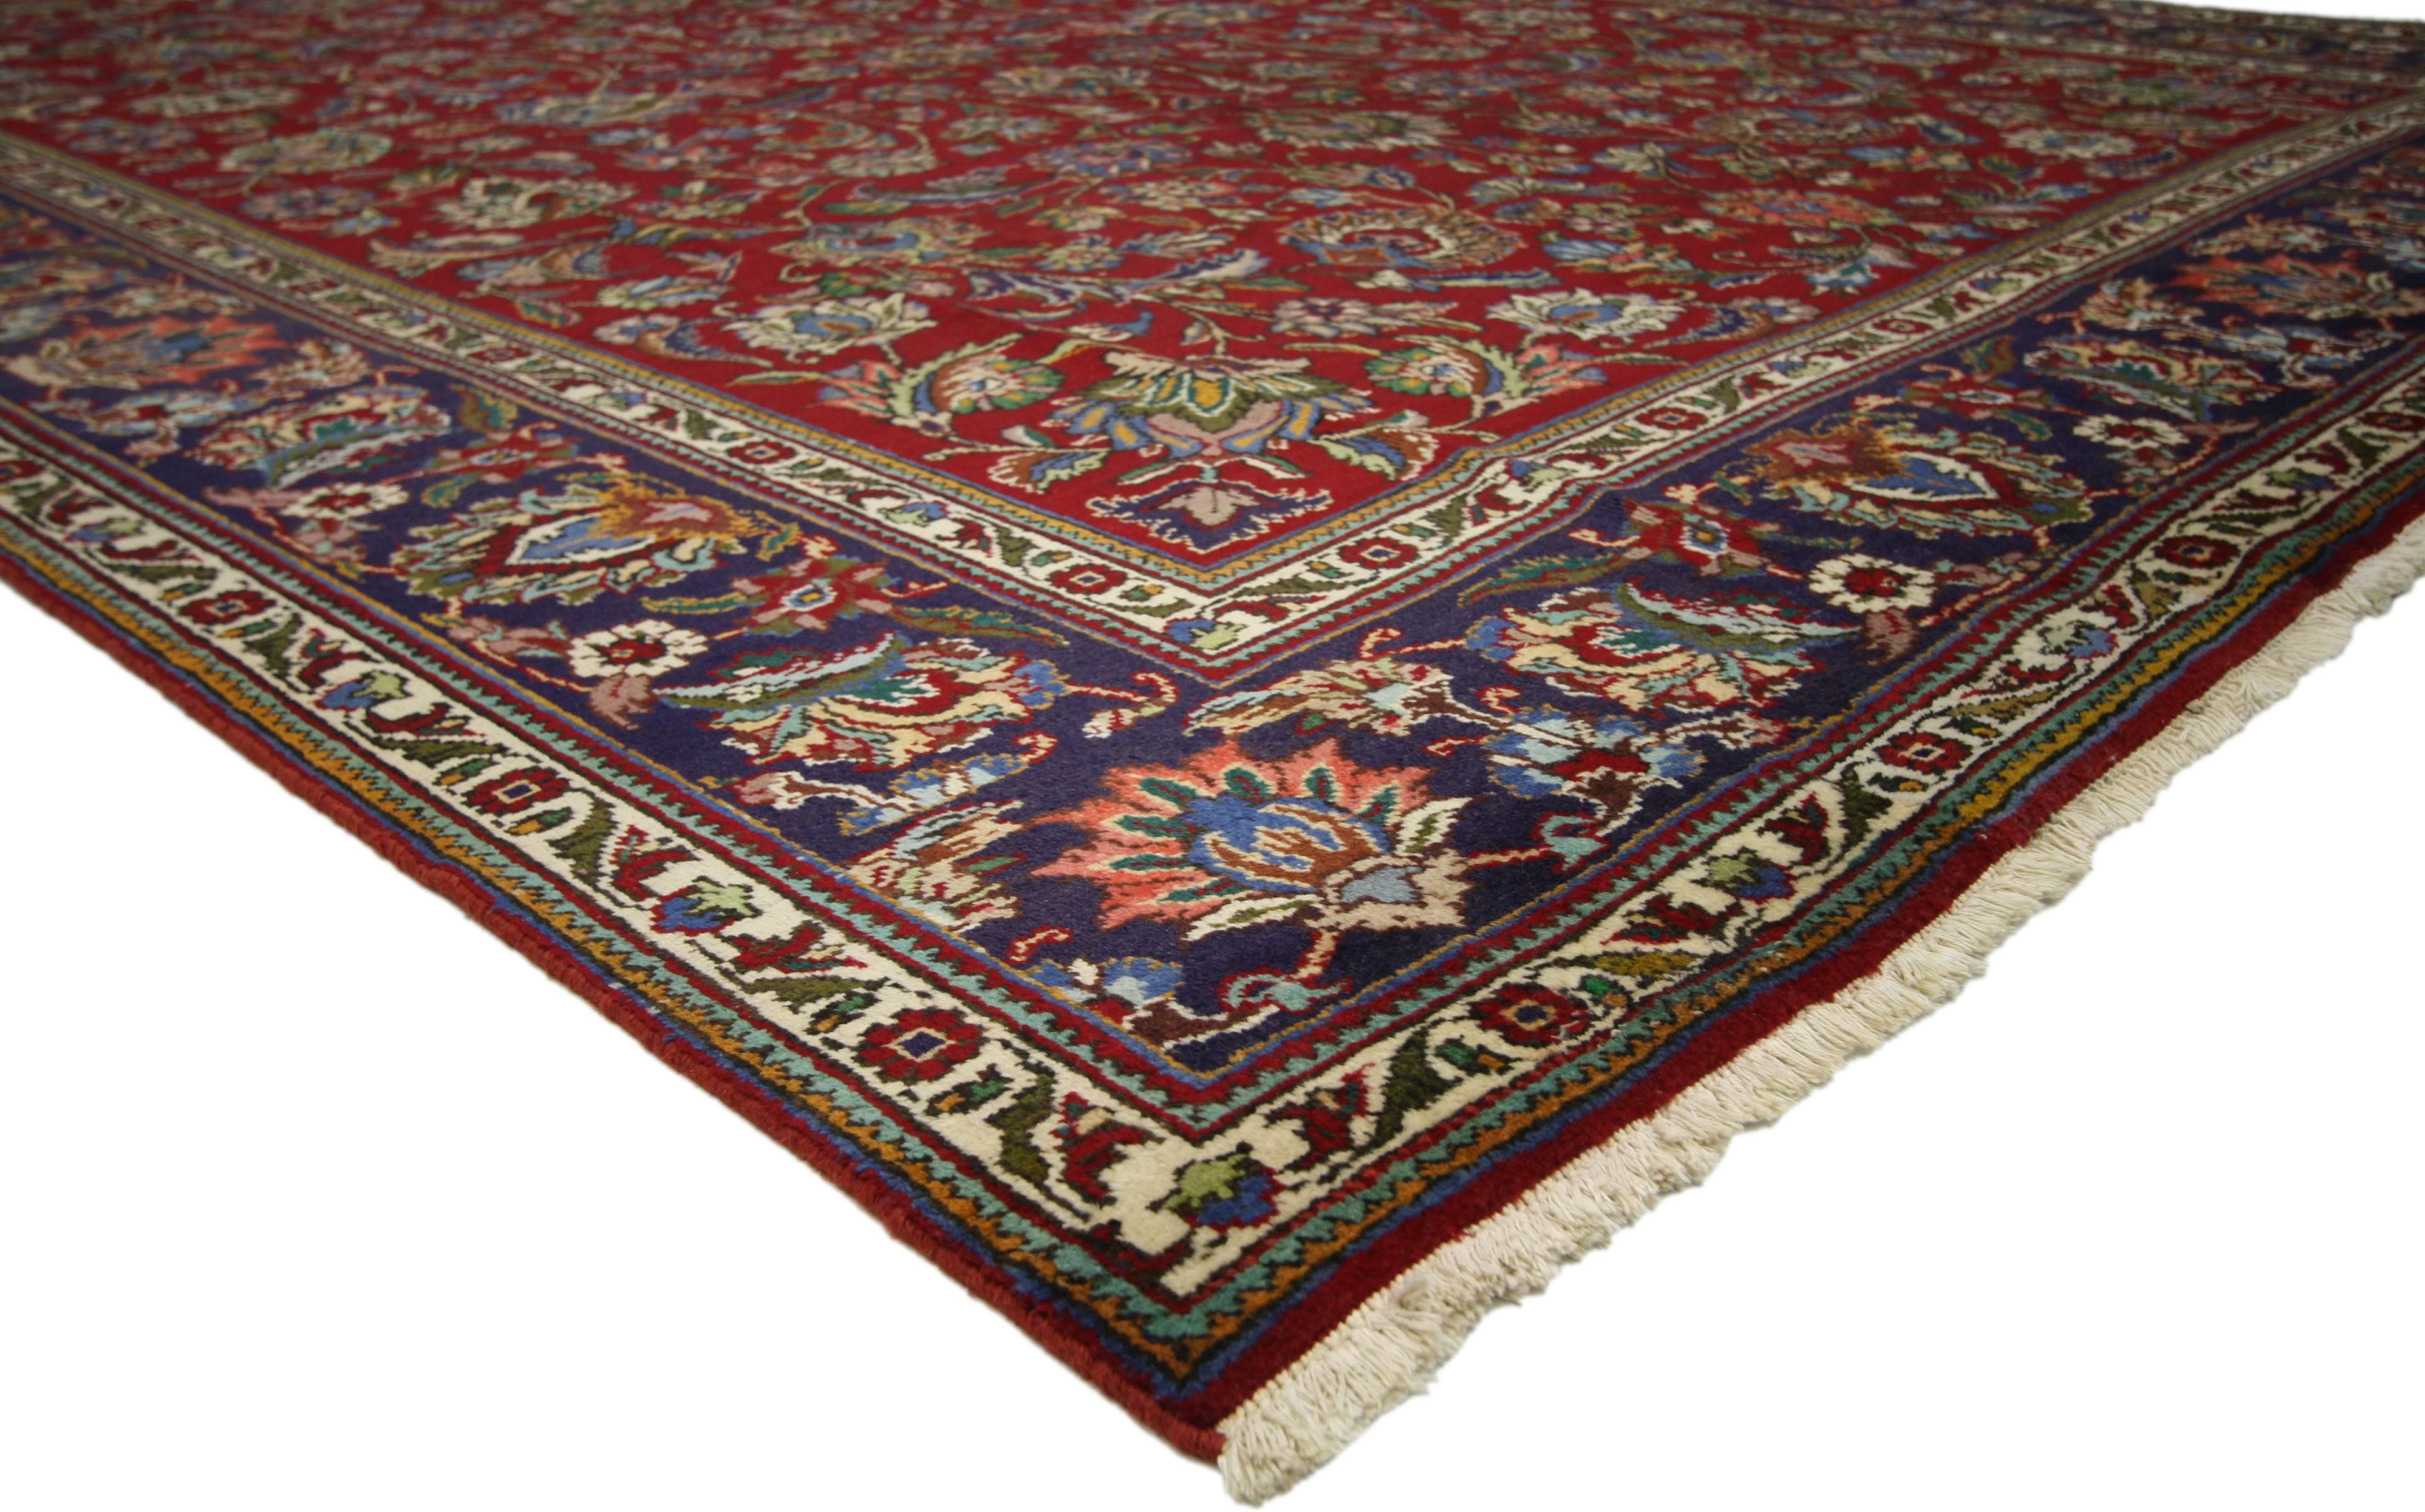 76262 Vintage Persian Tabriz Area Rug with Traditional Colonial and Federal Style. This hand-knotted wool vintage Persian Tabriz rug features an allover pattern surrounded by a classic border creating a well-balanced and timeless design. This